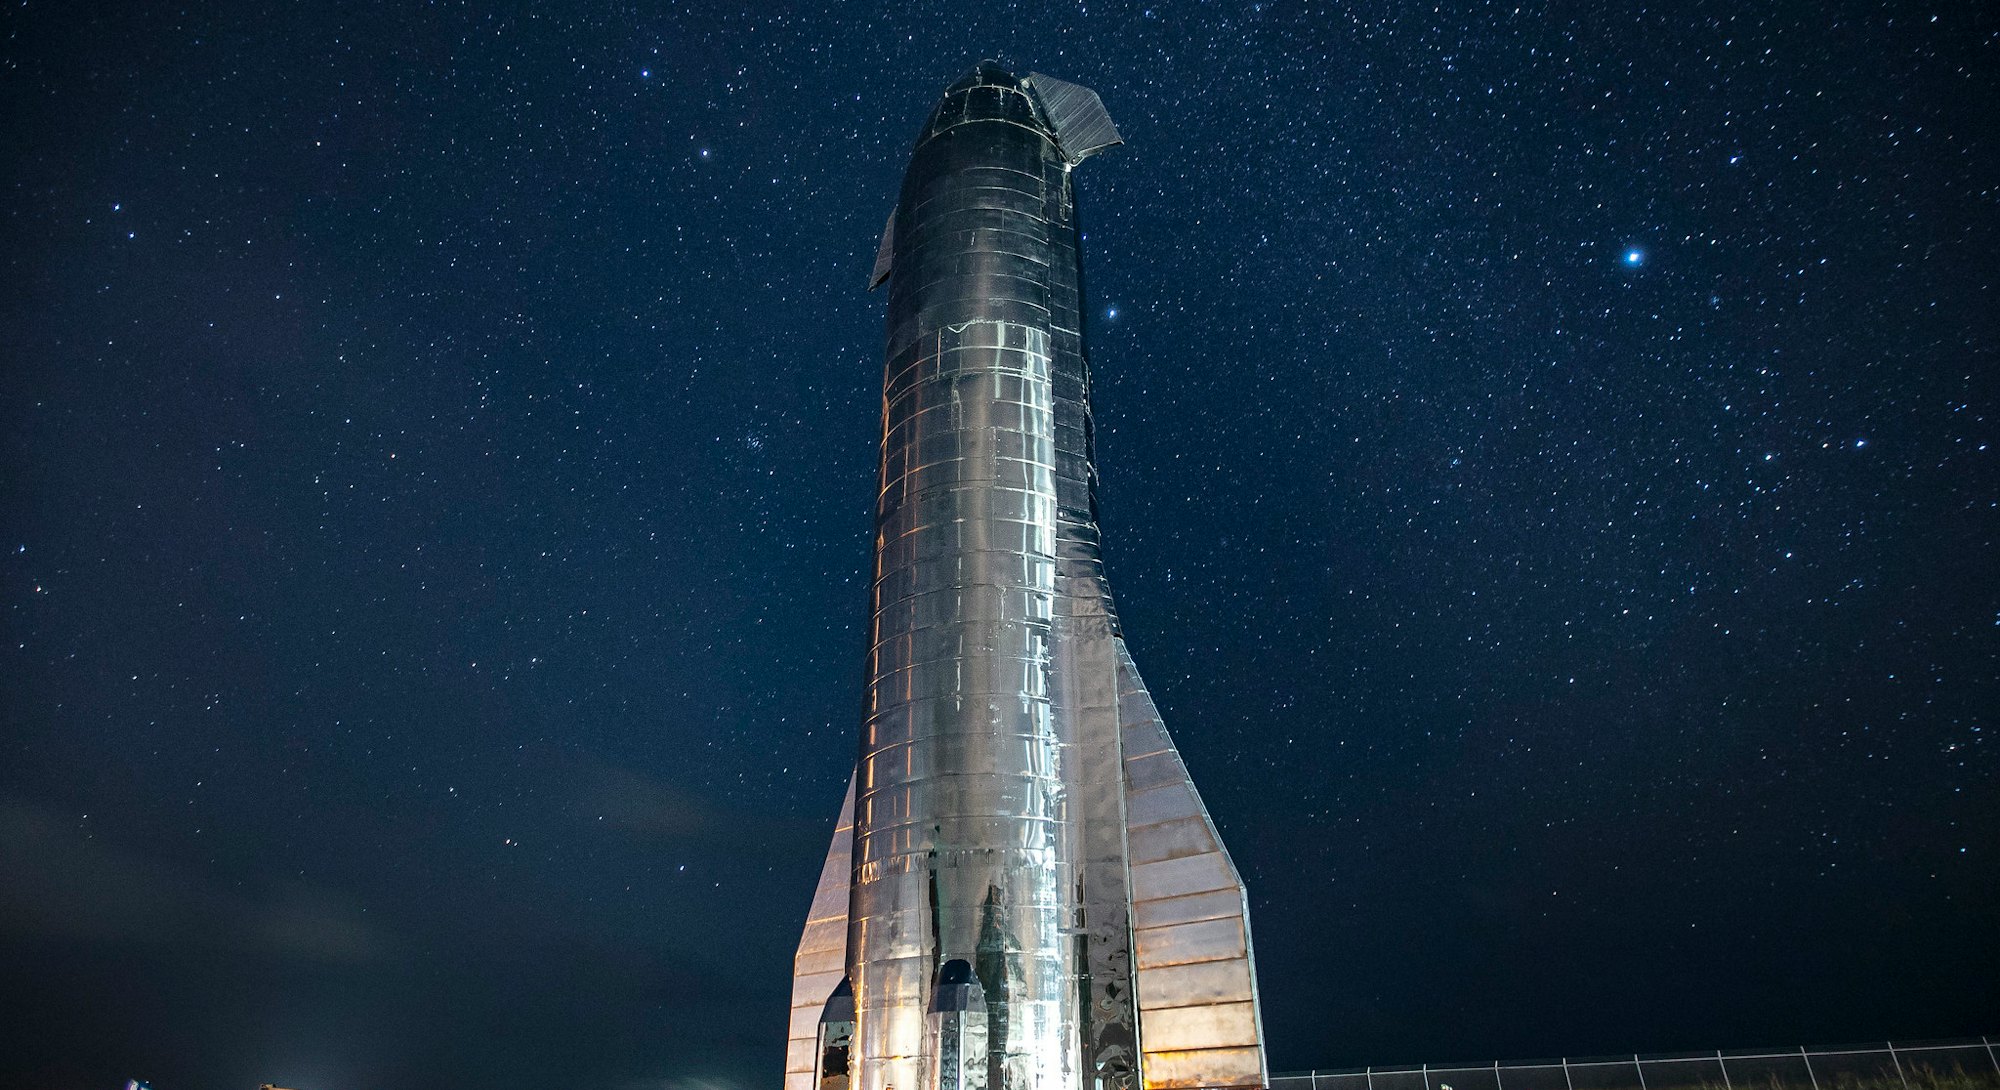 SpaceX's giant Starship launch vehicle towers over the land with glowing stars in the background aga...